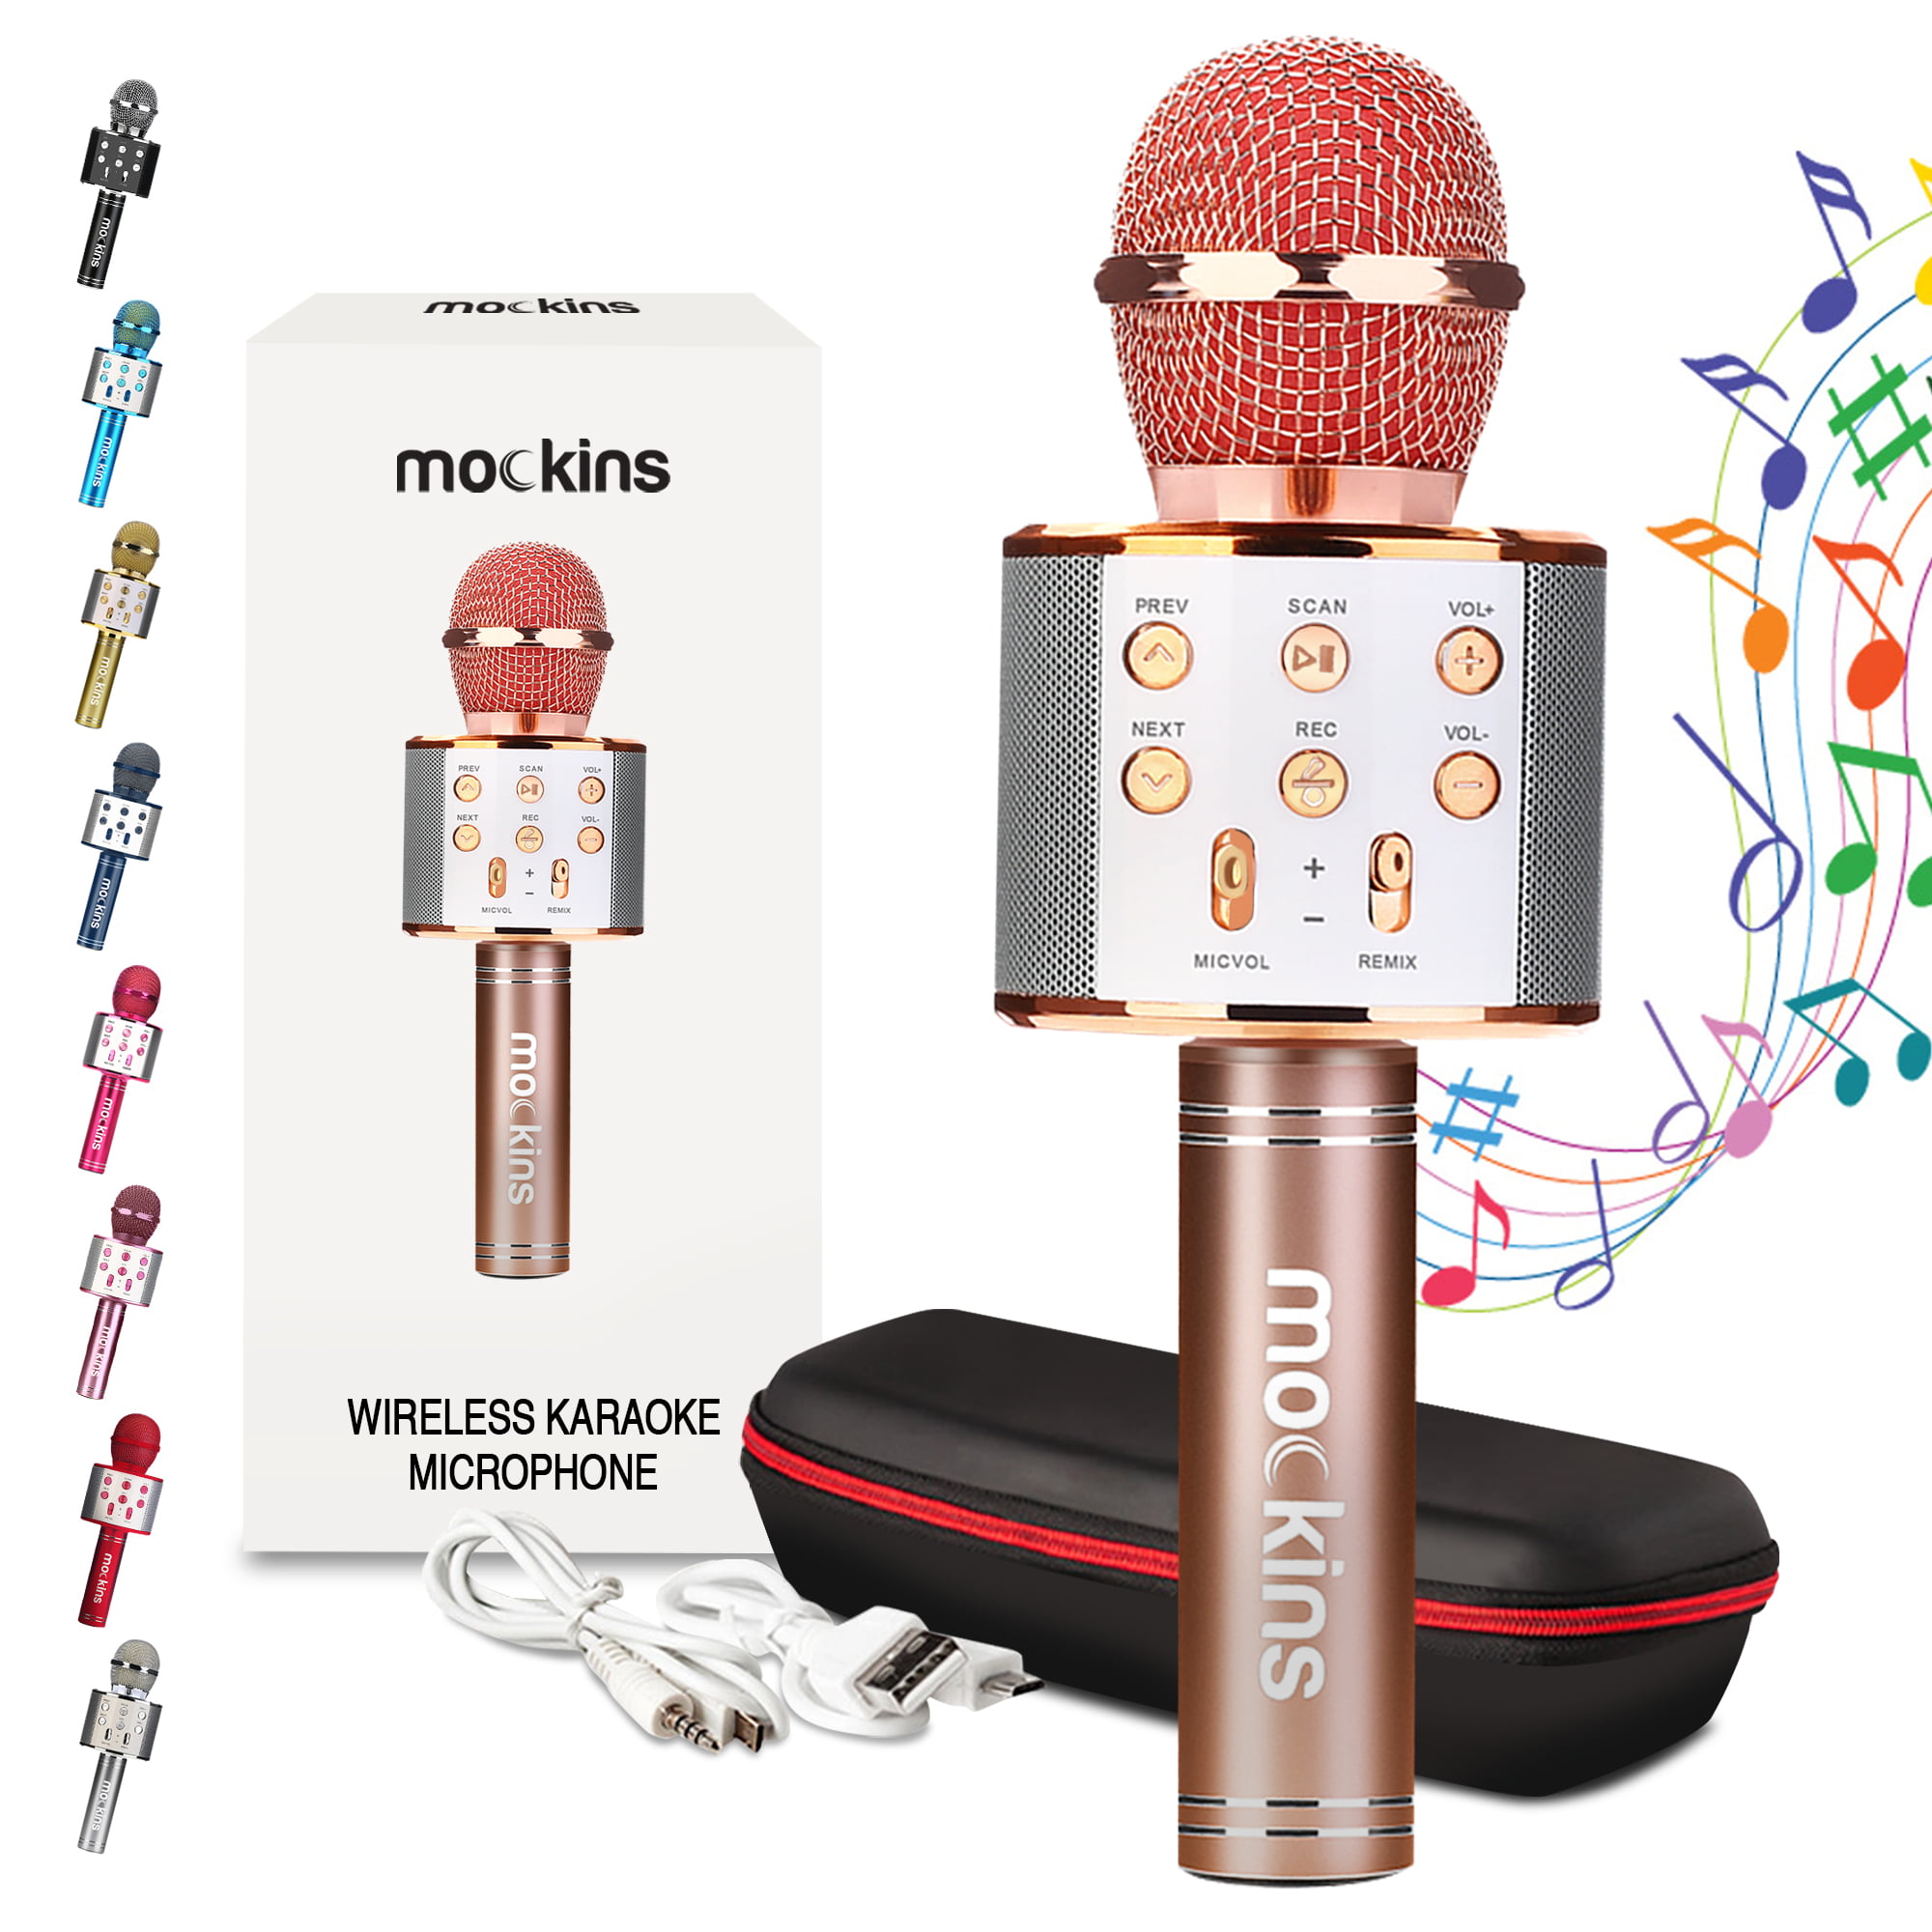 Masaccio Halloween timmerman Mockins Rose Gold Portable Bluetooth Karaoke Microphone | Mic & Bluetooth  Speaker | Compatible with IOS and Android Devices - Walmart.com